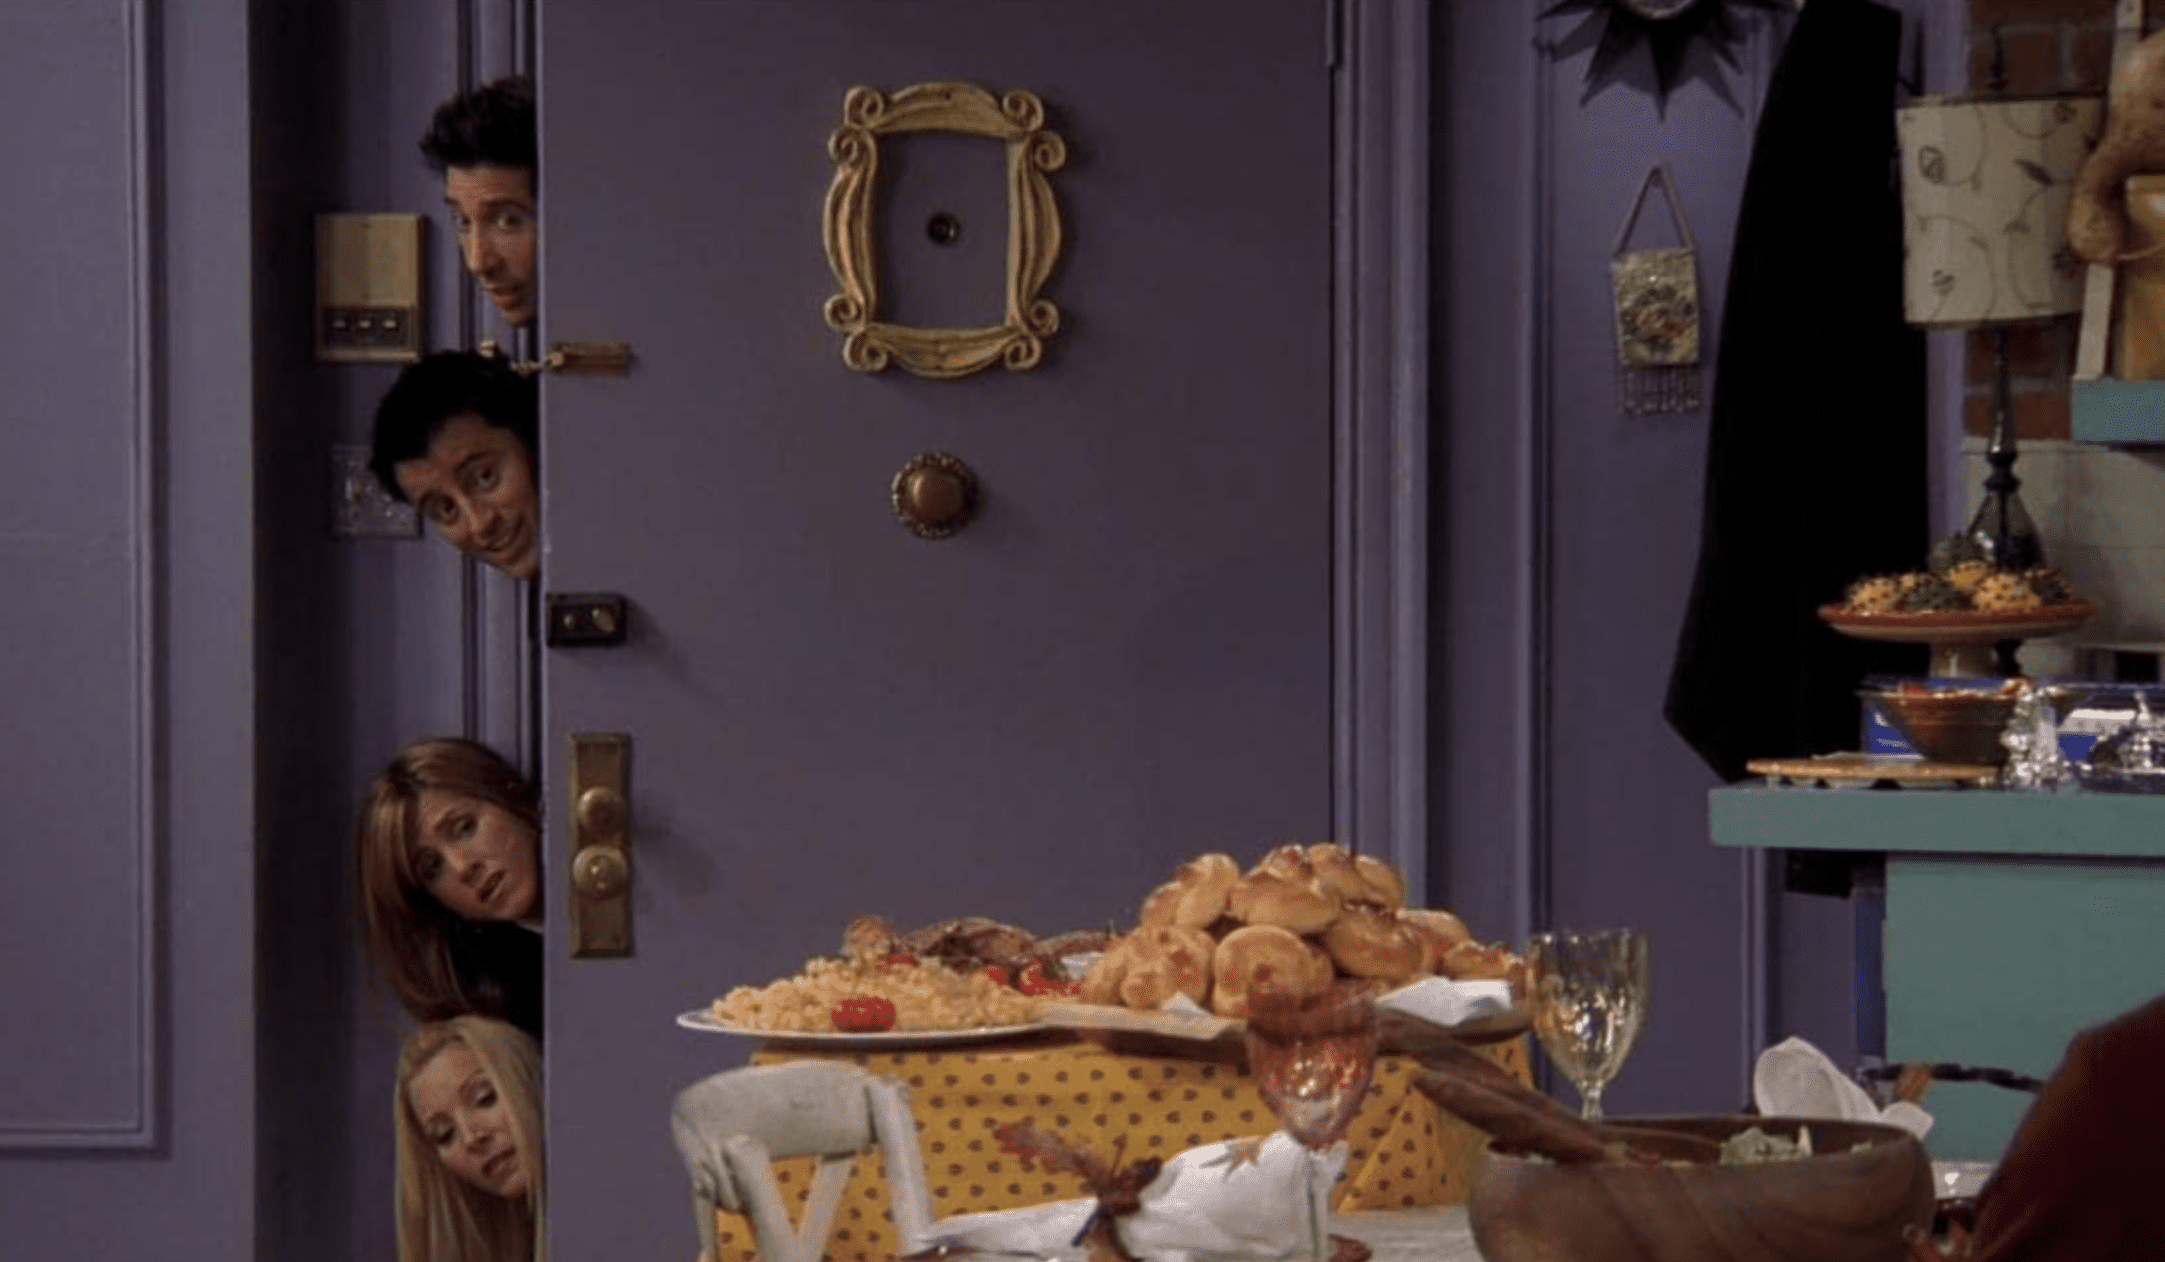 The four latecomers are locked out of Monica’s apartment.